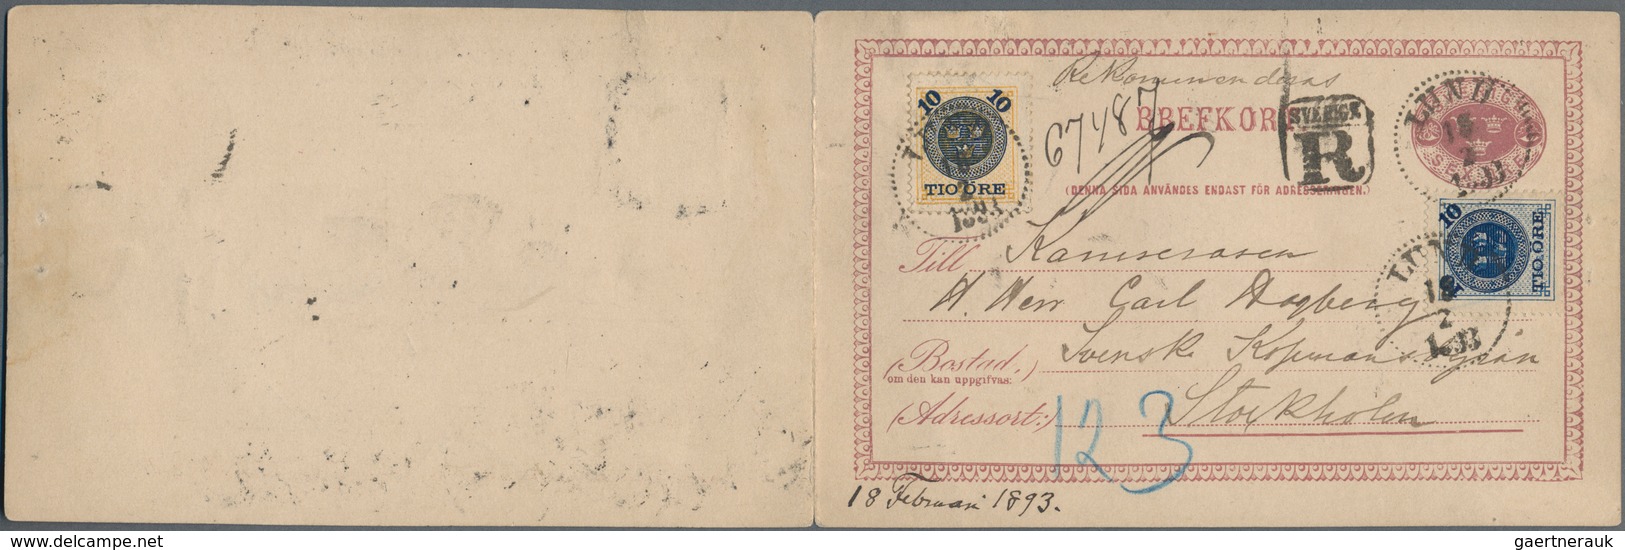 Schweden - Ganzsachen: 1882 Postal Stationery Double Card 6+6 øre Used Registered From Lund To Stock - Postal Stationery